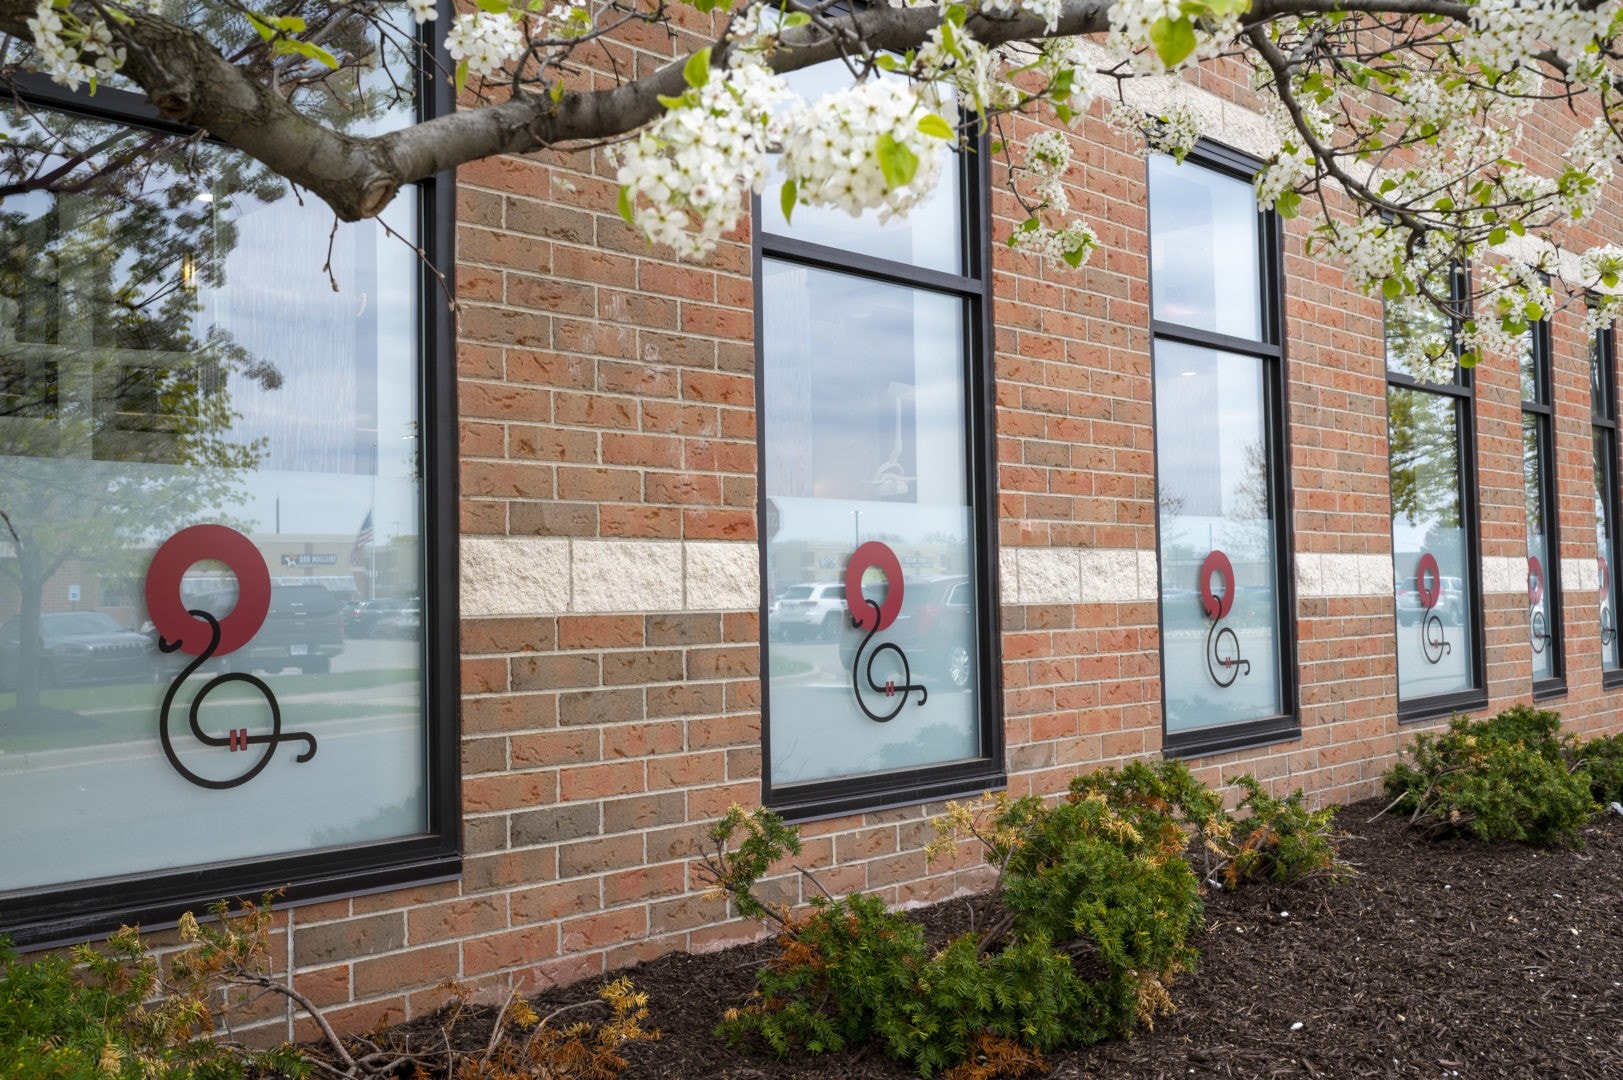 Exterior view of the windows of Oakland Orthodonics featuring the dental practice's logo.